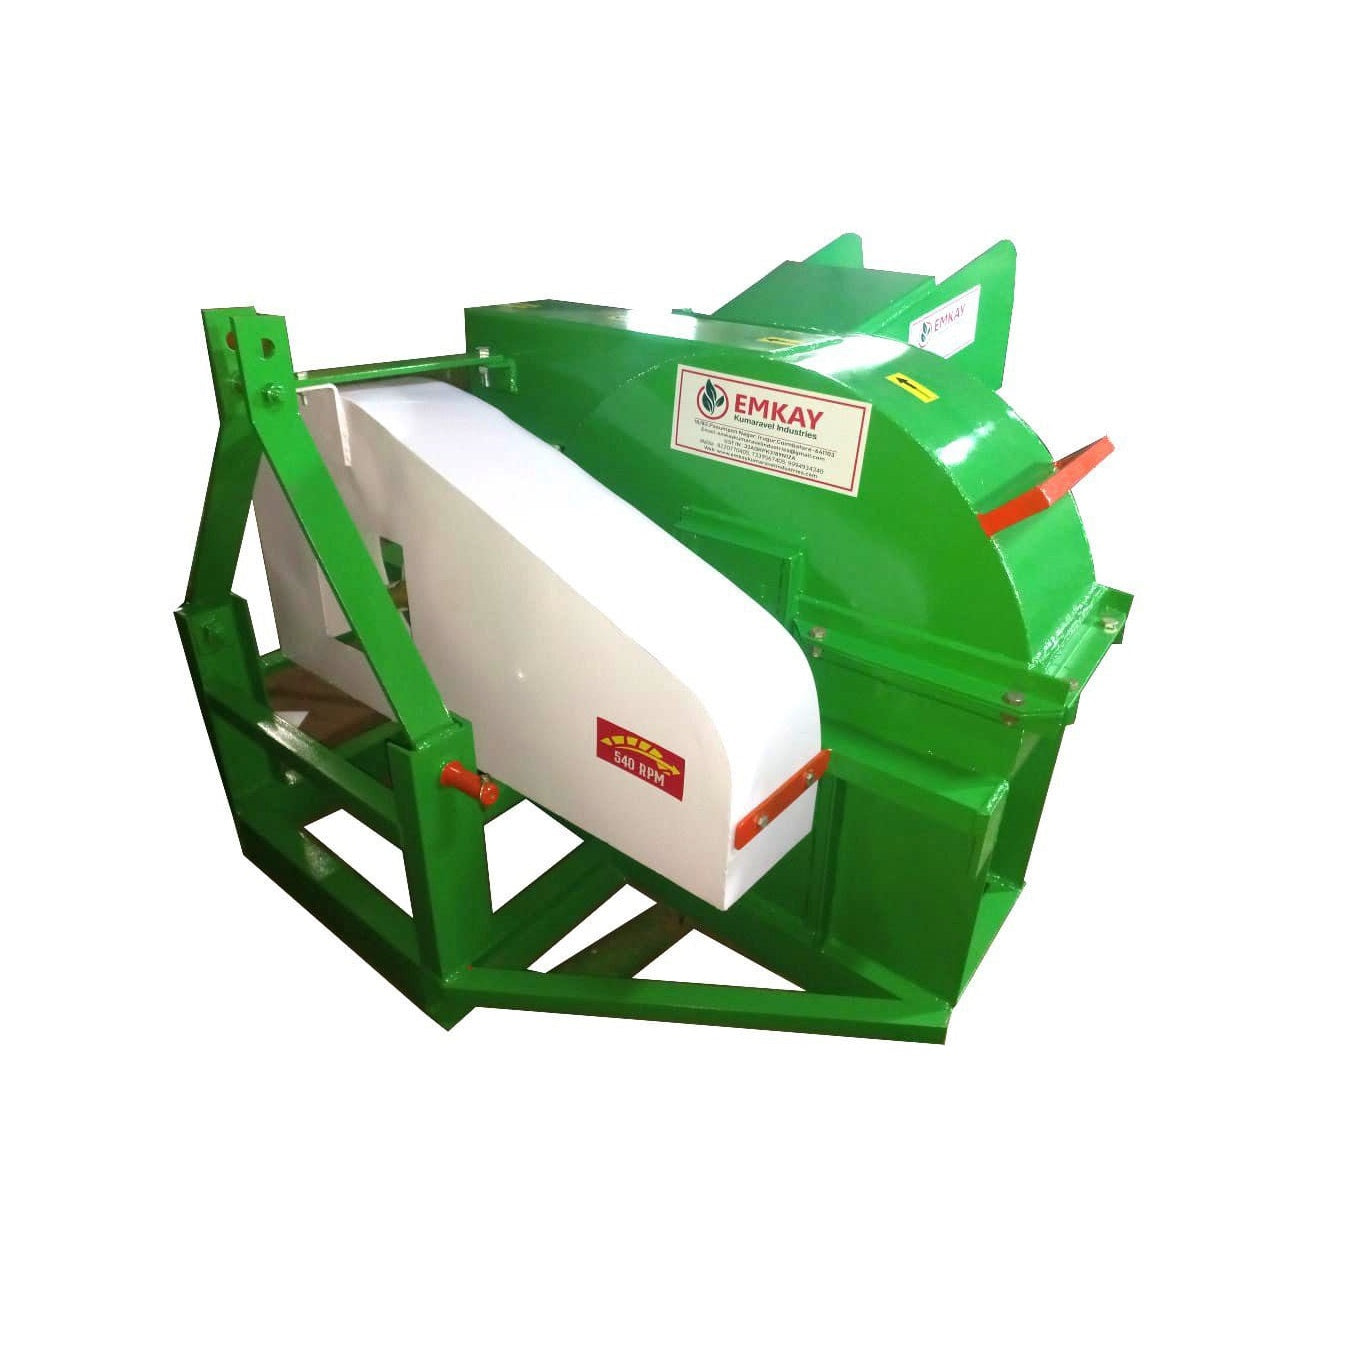 Emkay 27HP Mini Shredder Tractor Operated With Pulverizer